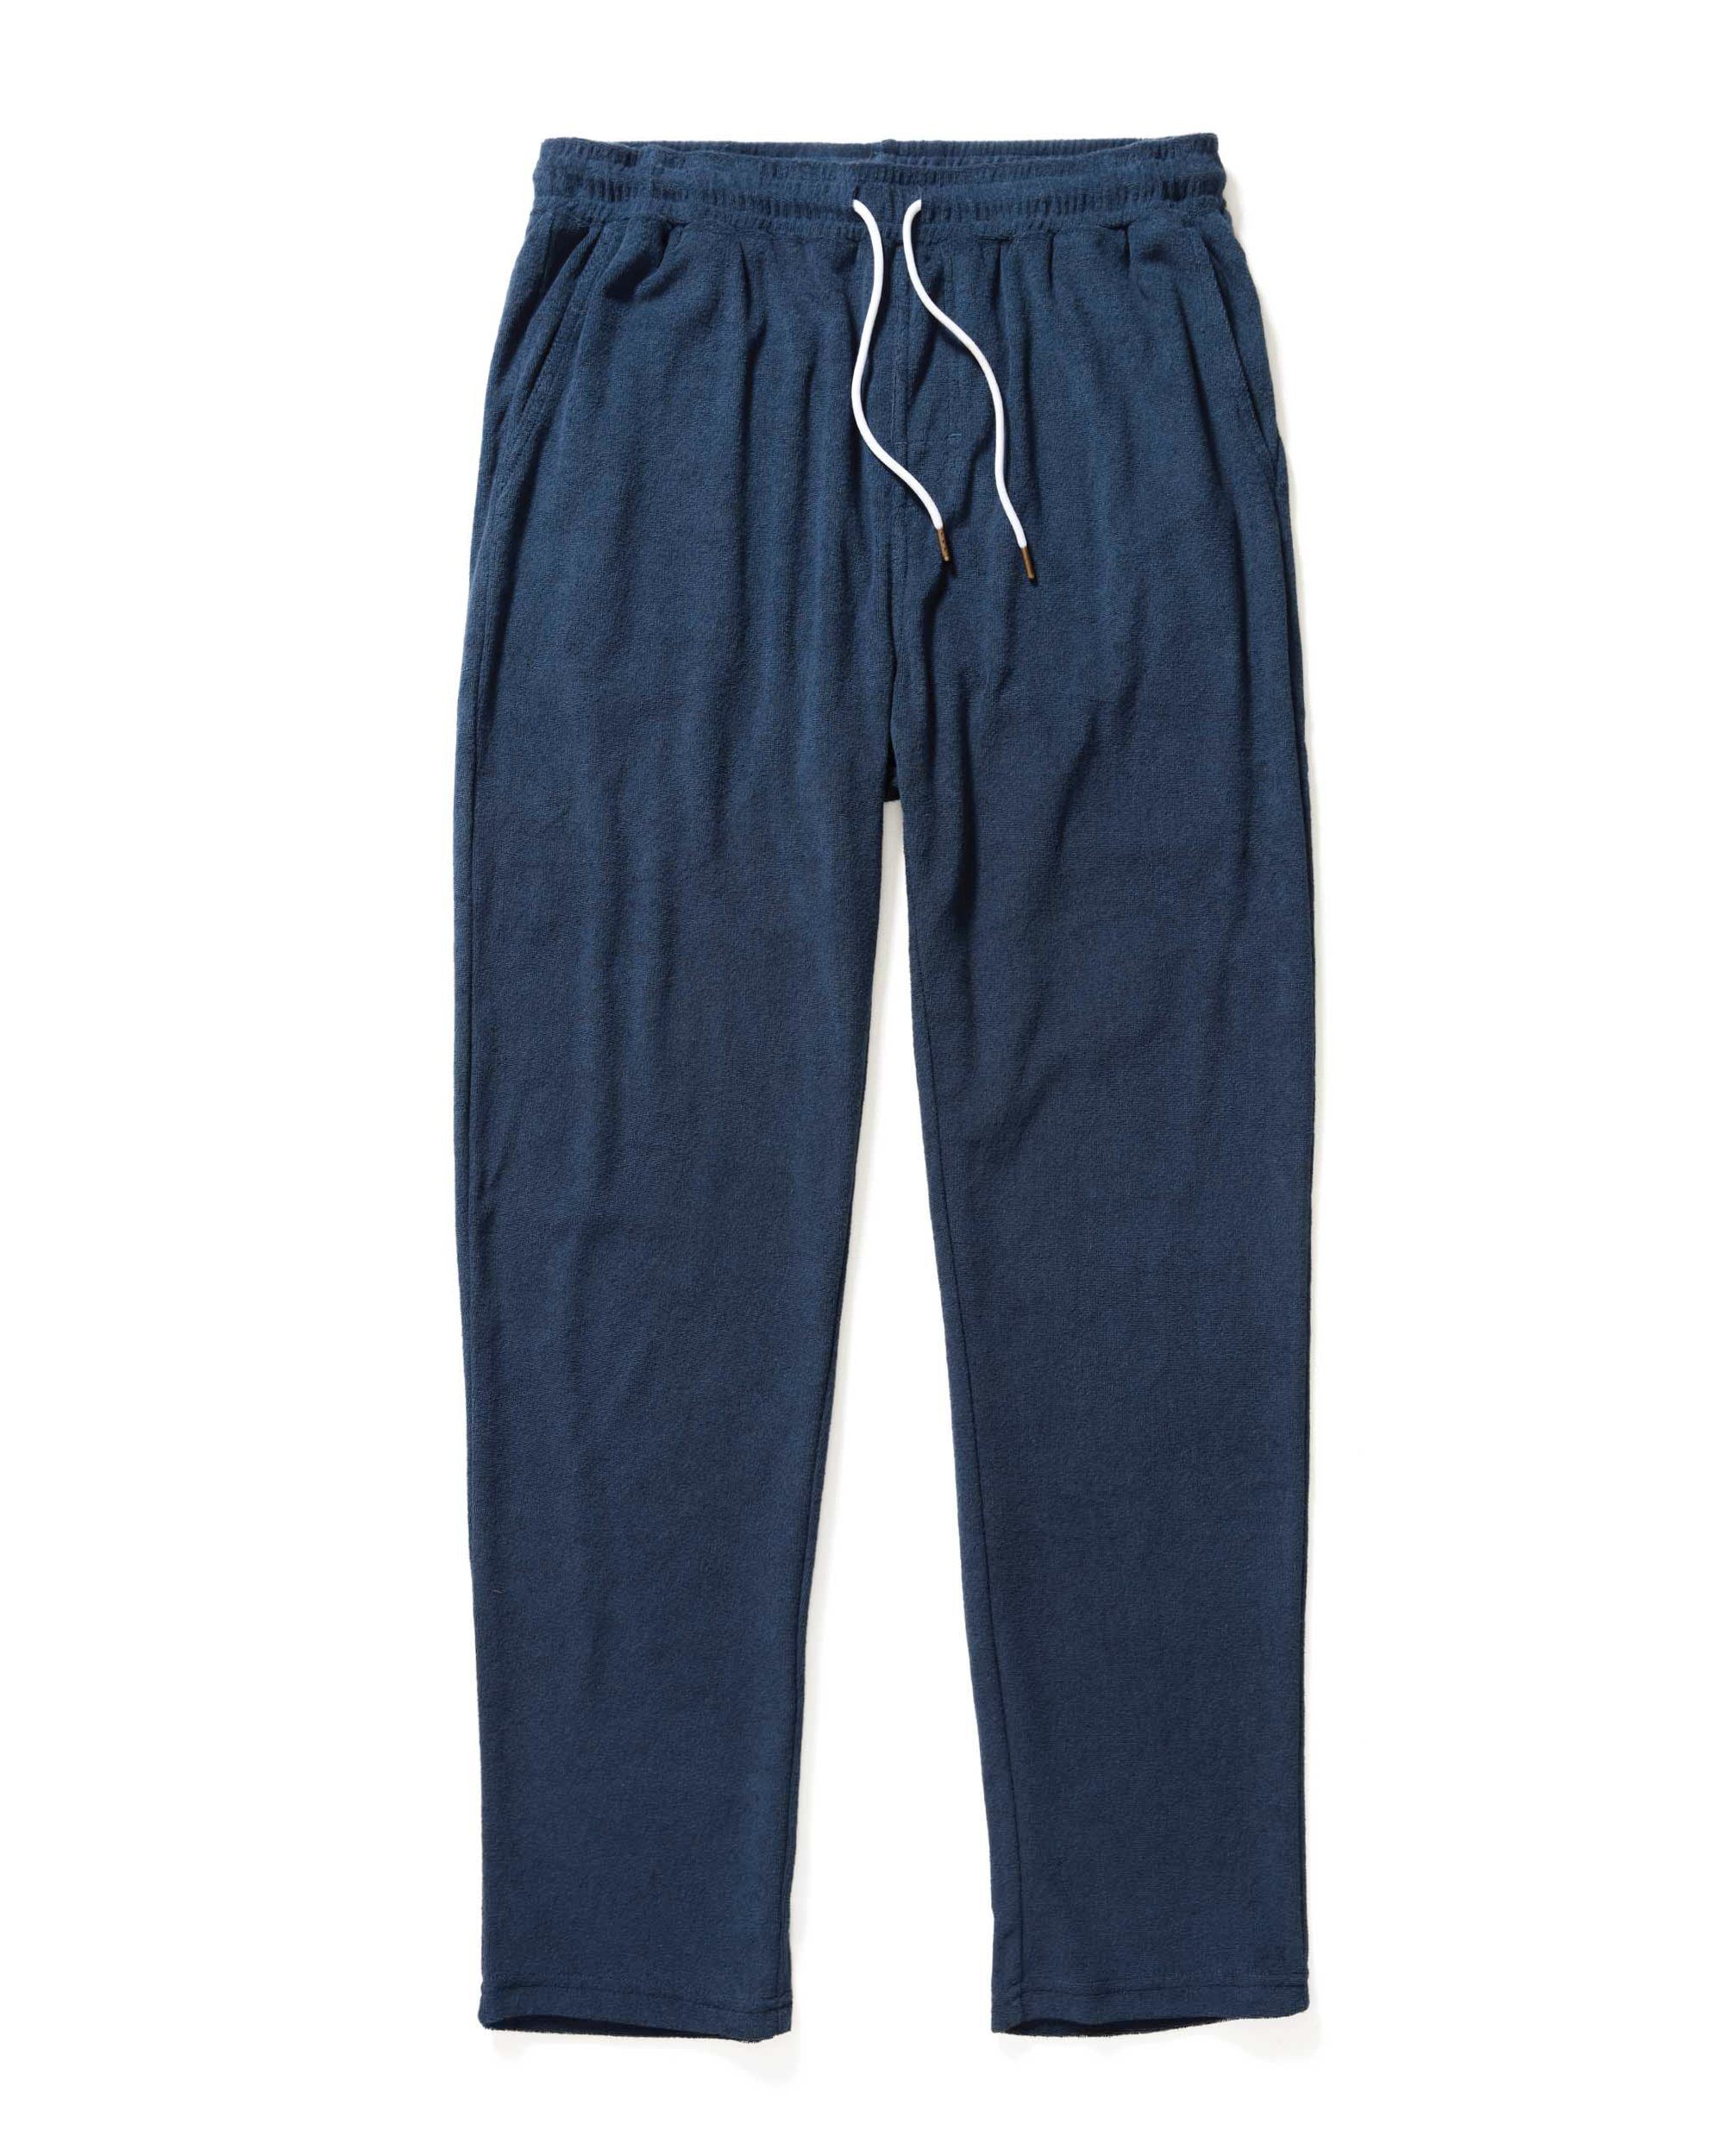 Image of The Gaucho Terry Cloth Pants